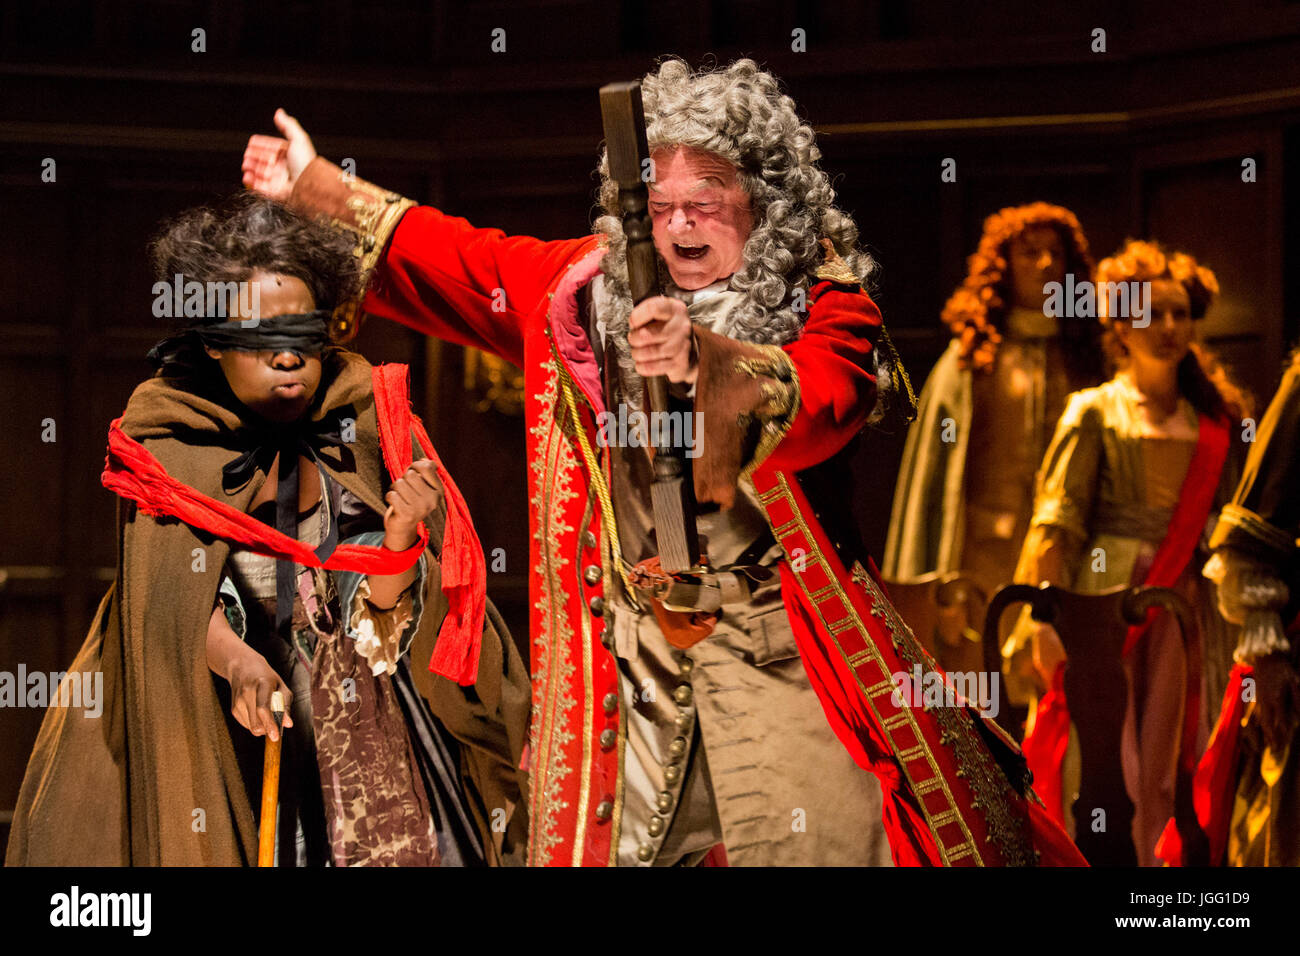 London, UK. 6th July, 2017. At the centre in the red coat Michael Fenton Stevens as Dr John Radcliffe. After a sold out run at the Swan Theatre in Stratford-upon-Avon in 2015-16, the Royal Shakespeare Company production of Queen Anne transfers to the Theatre Royal Haymarket from 30 June for a thirteen week limited run until 30 September 2017. Queen Anne is a new play written by Helen Edmundson and directed by Natalie Abrahami. With Emma Cunniffe as Queen Anne/Princess Anne, Romola Garai as Sarah Churchill/Duchess of Marlborough. Credit: Bettina Strenske/Alamy Live News Stock Photo